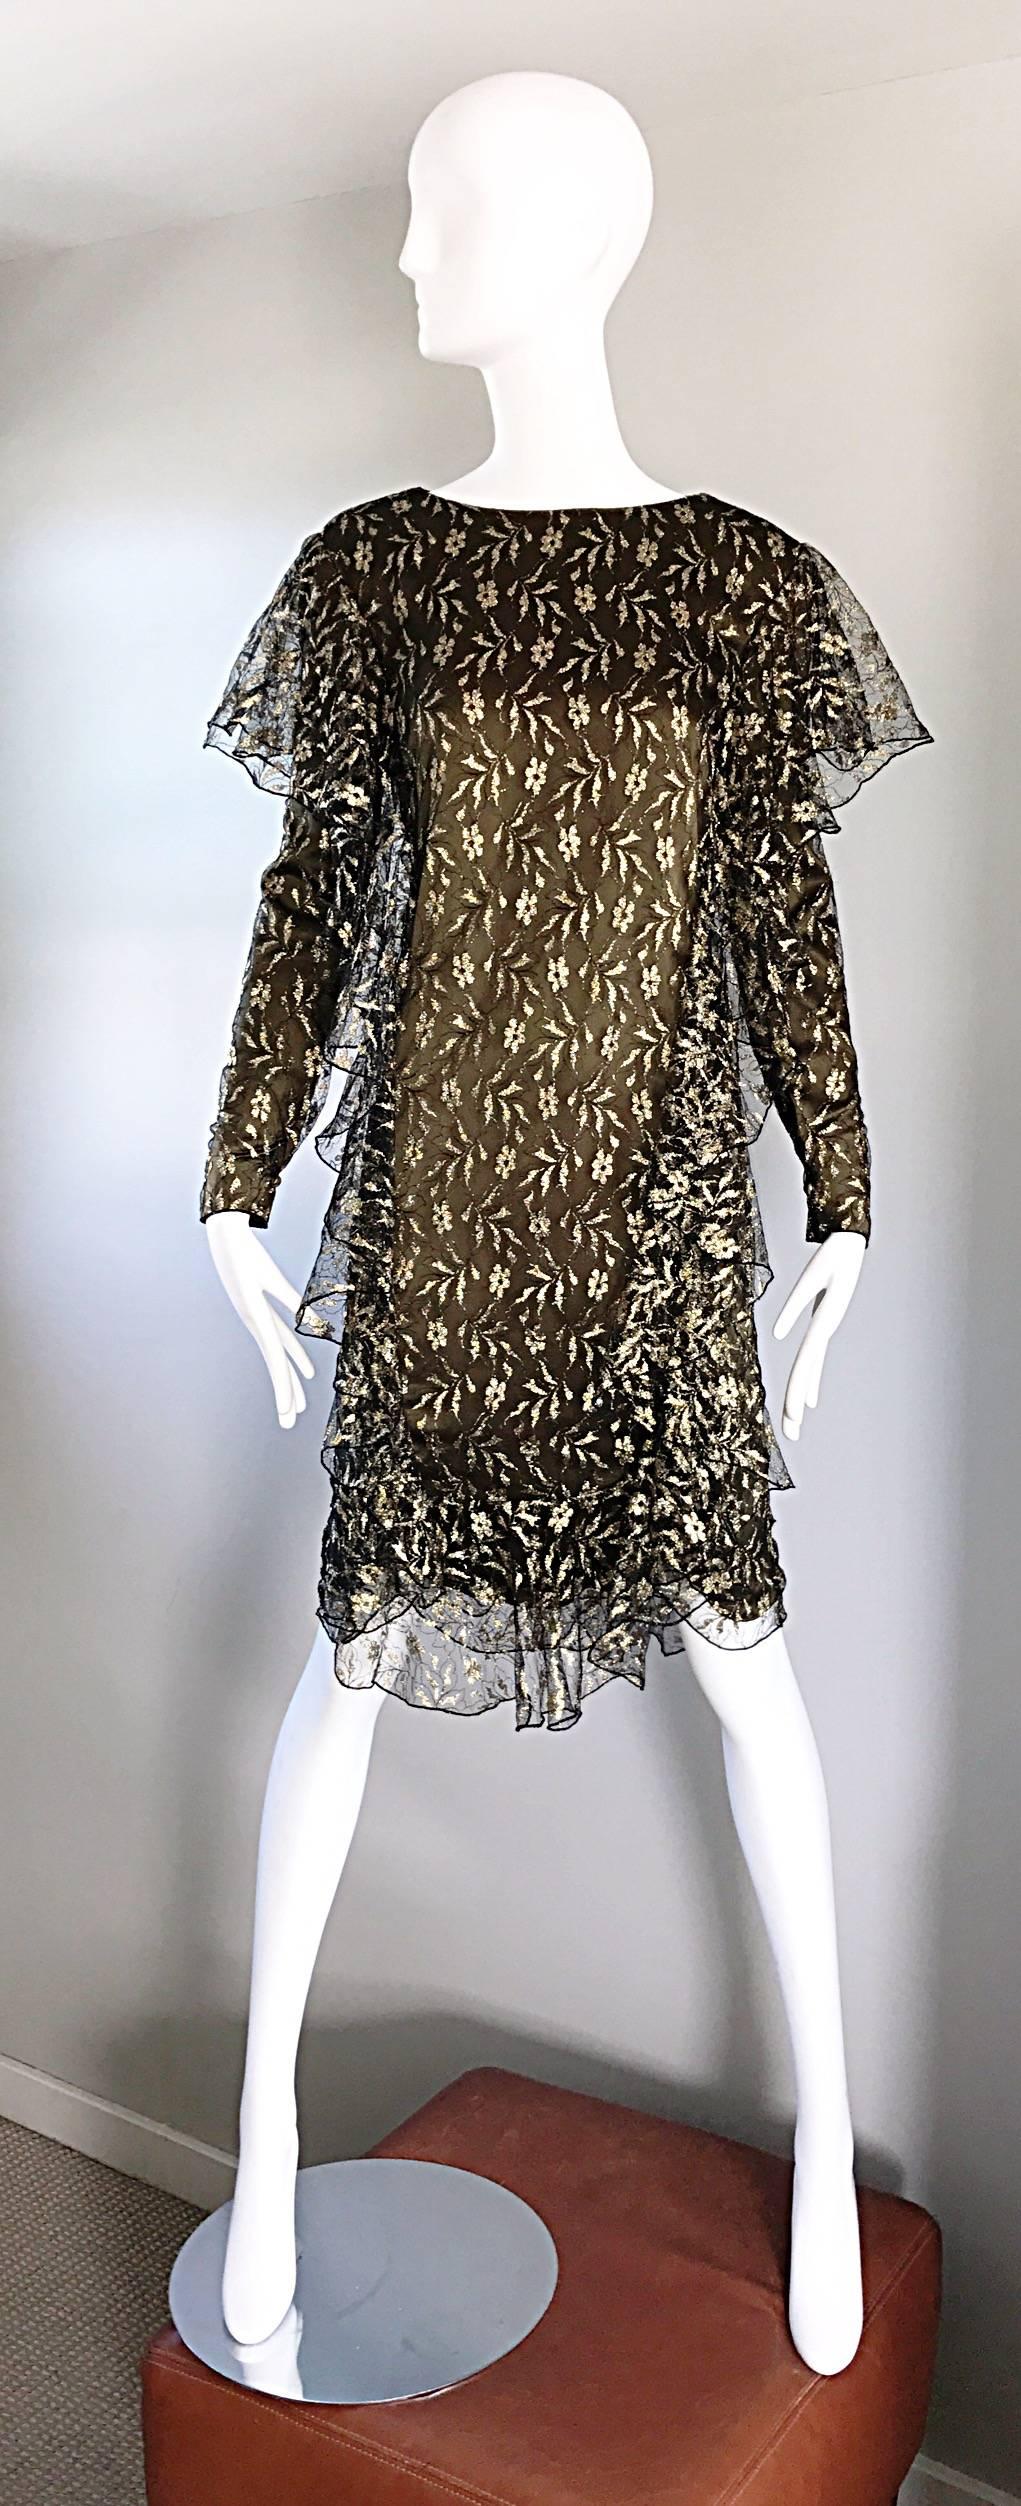 Incredible vintage HOLLY'S HARP for BERGDORF GOODMAN late 1970s / 70s flapper inspired dress! Couture workmanship on the boho beauty! Features dark forest green lace with metallic gold throughout. Ruffles add to the beauty of this rare gem! Sellek